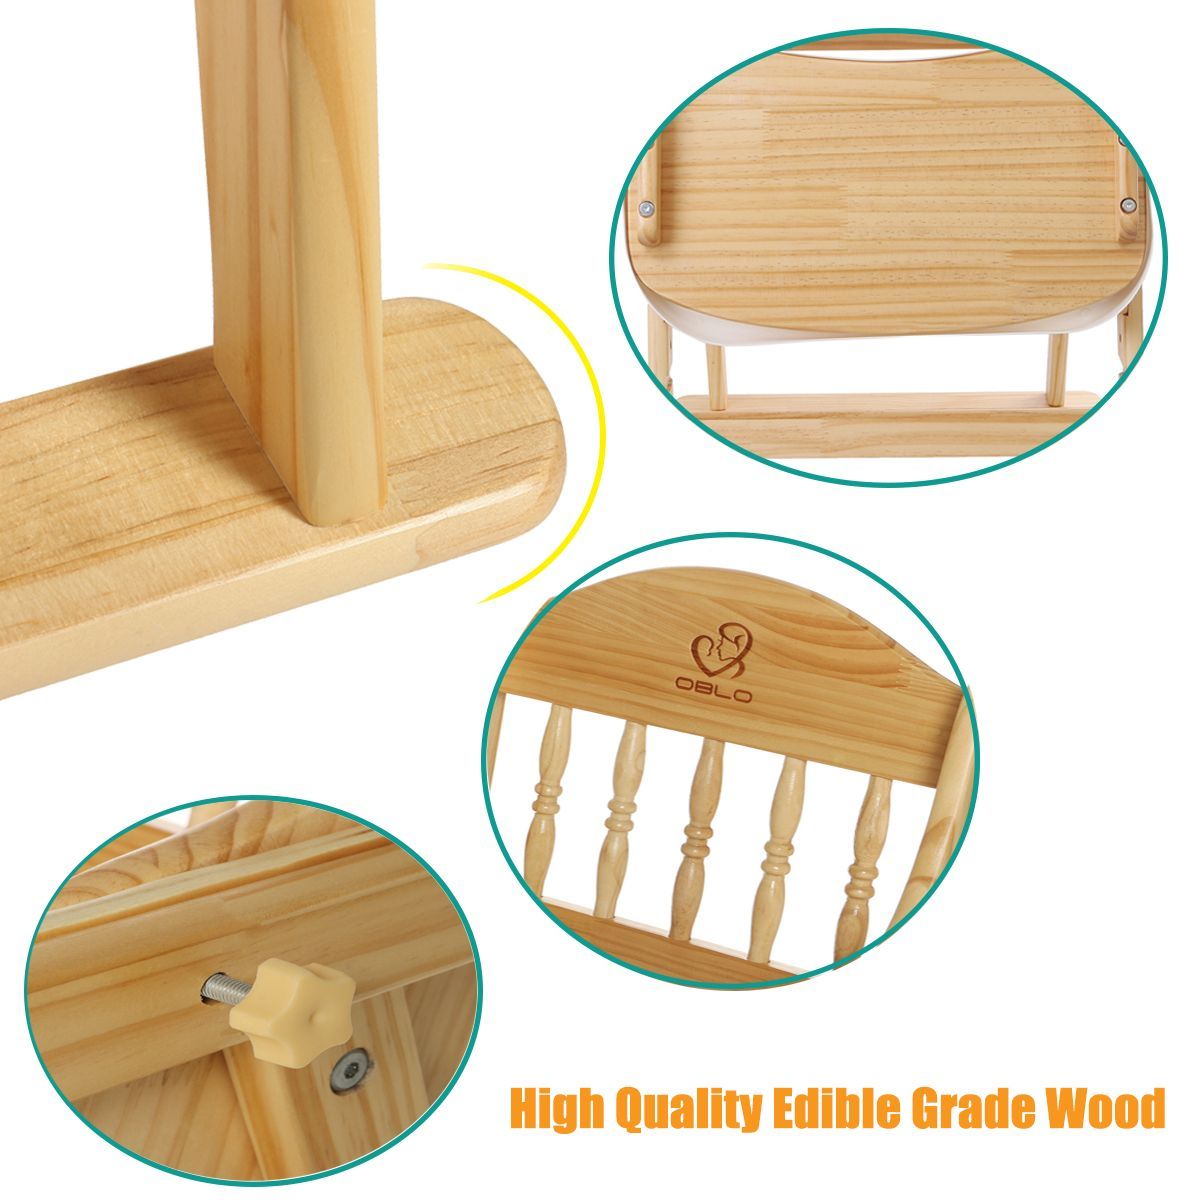 Folding-Adjustable-Baby-Wooden-High-Chair-Table-Seat-Toddler-Feeding-Highchair-1667638